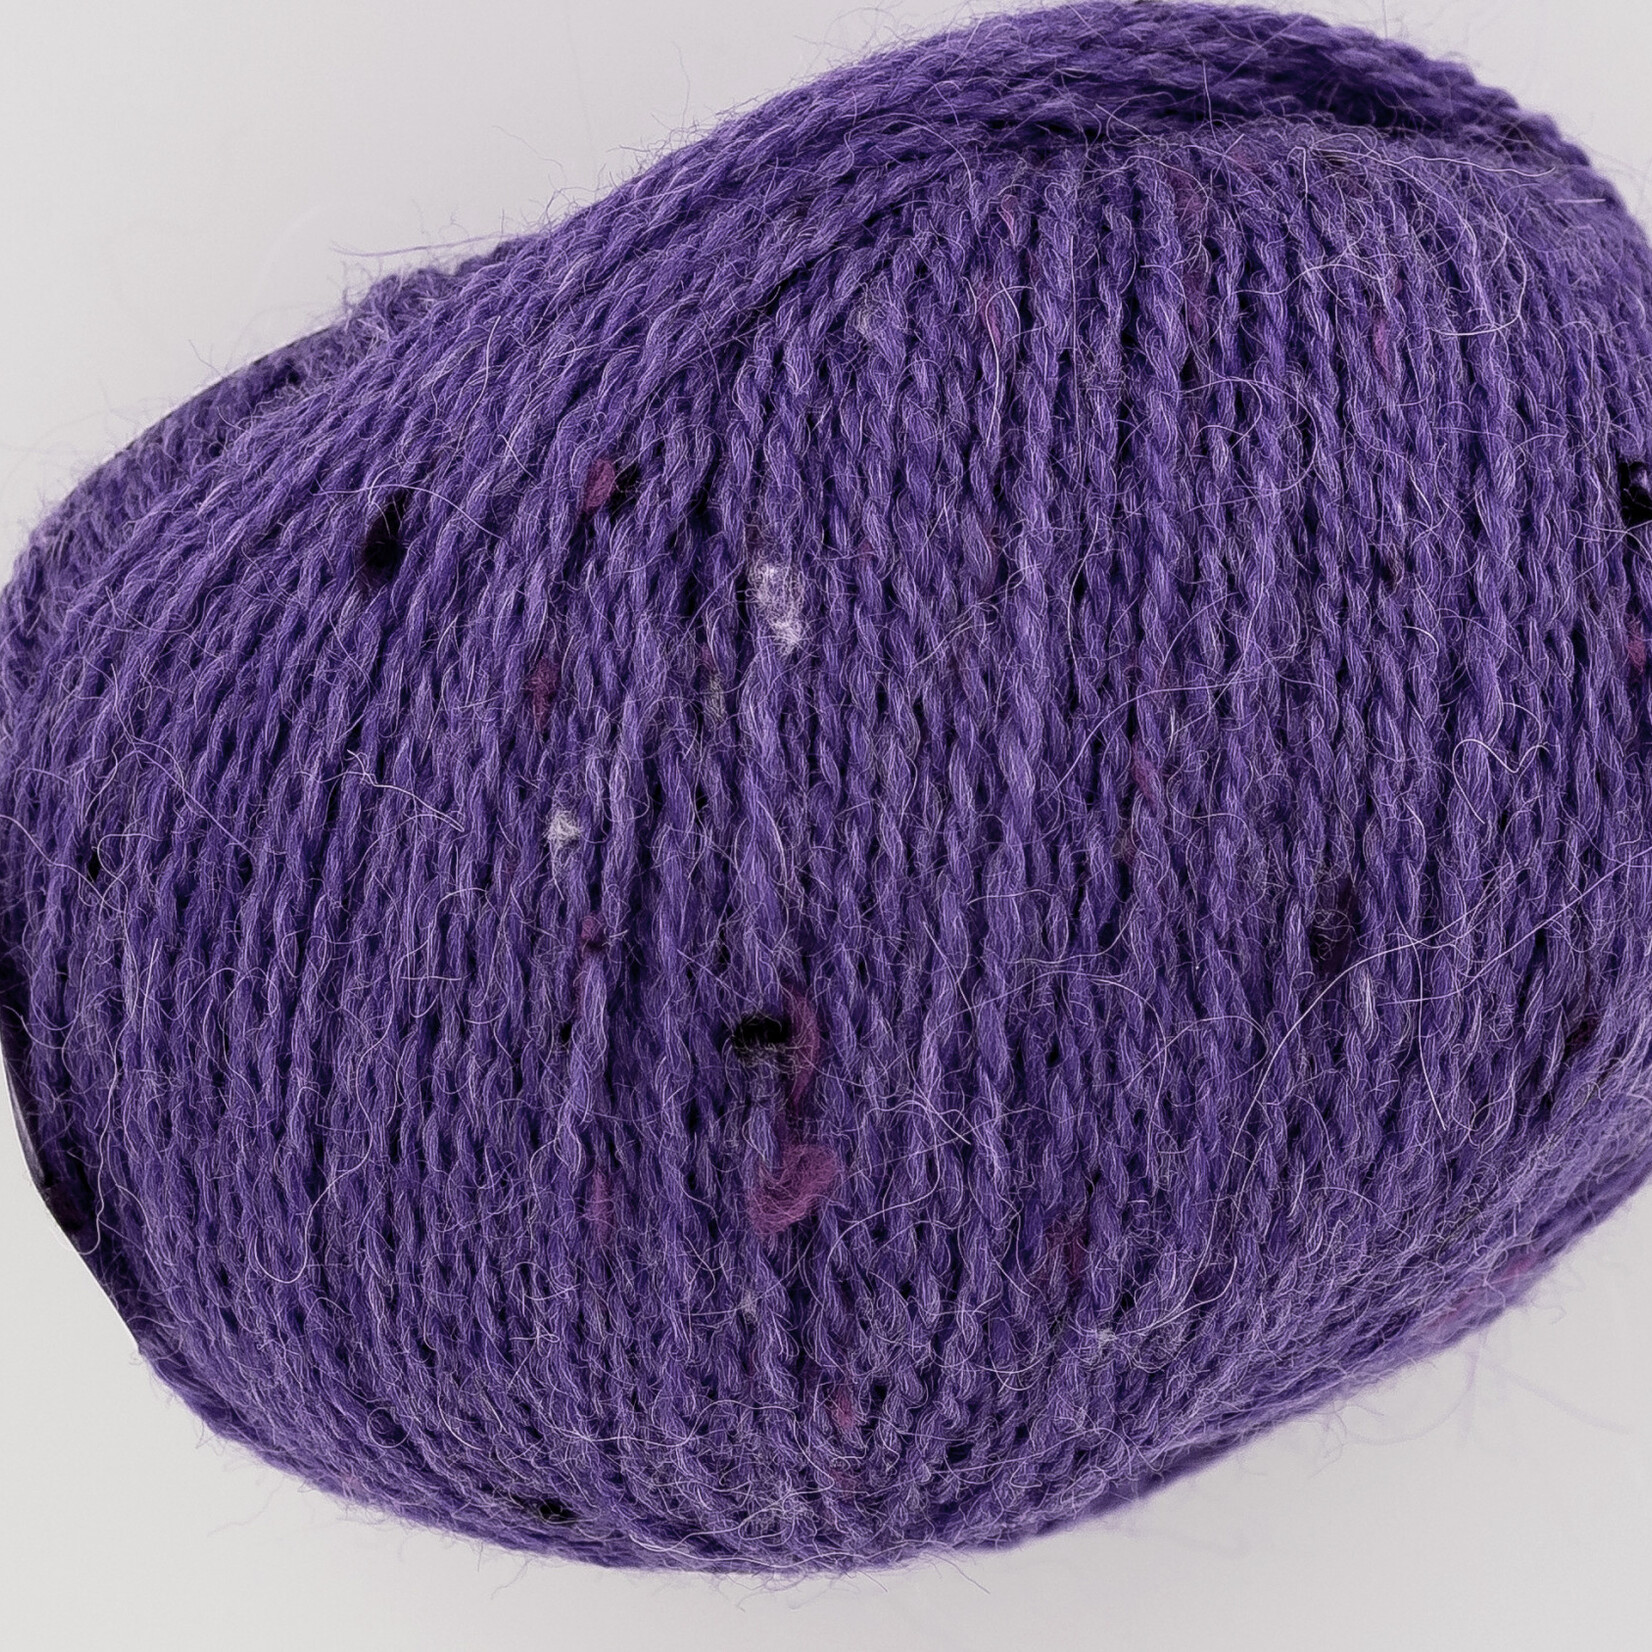 King Cole Homespun DK by King Cole